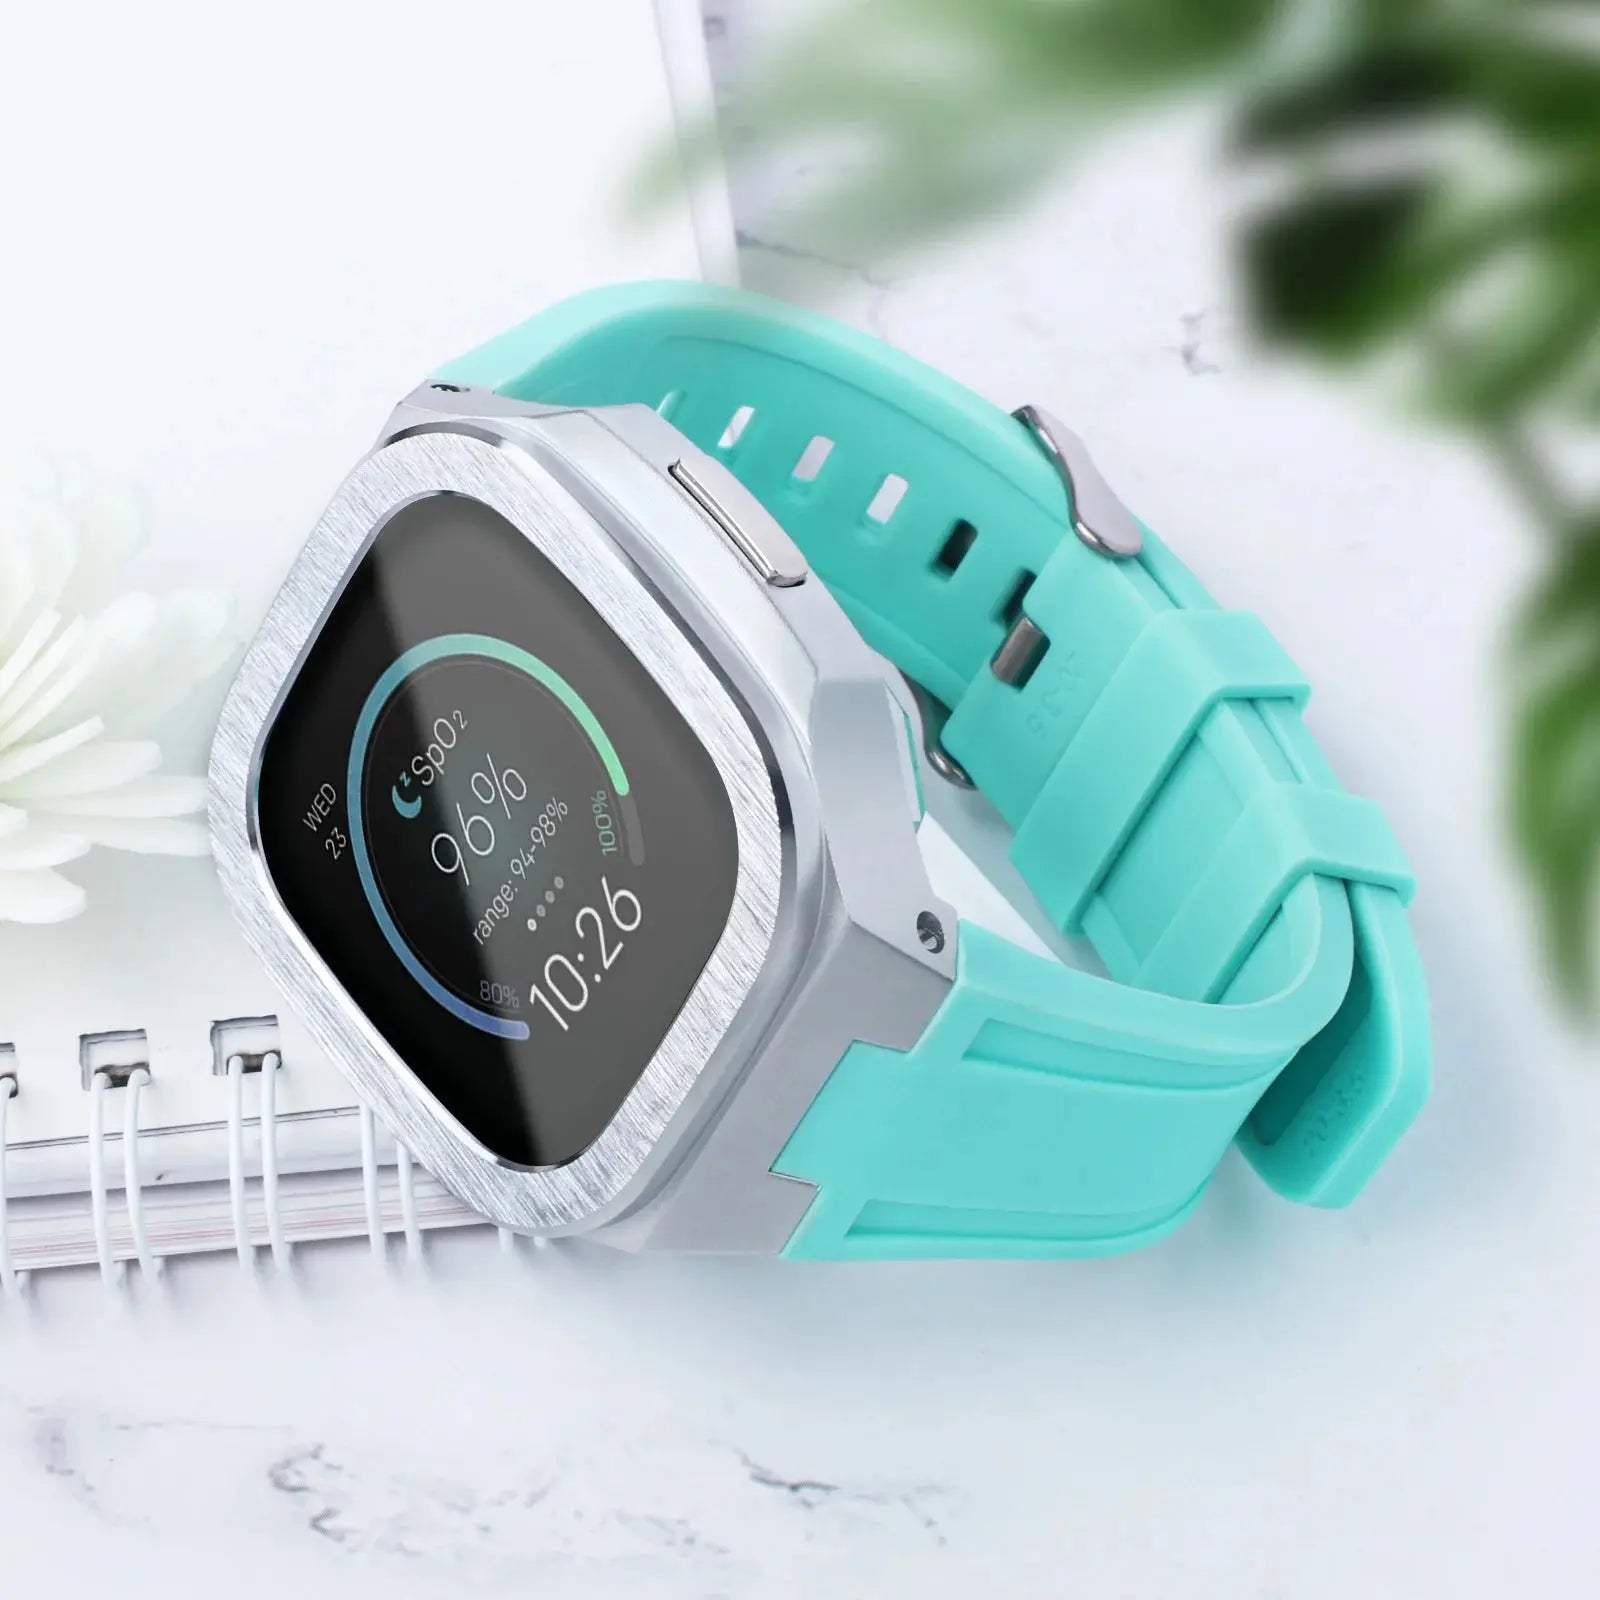 Smart Watch Case for Fitbit Versa 3 4/ Fitbit Sense 2 Ultra Thin Glass Screen Protector Sports Strap for Fitbit Versa 3/Sense Pinnacle Luxuries